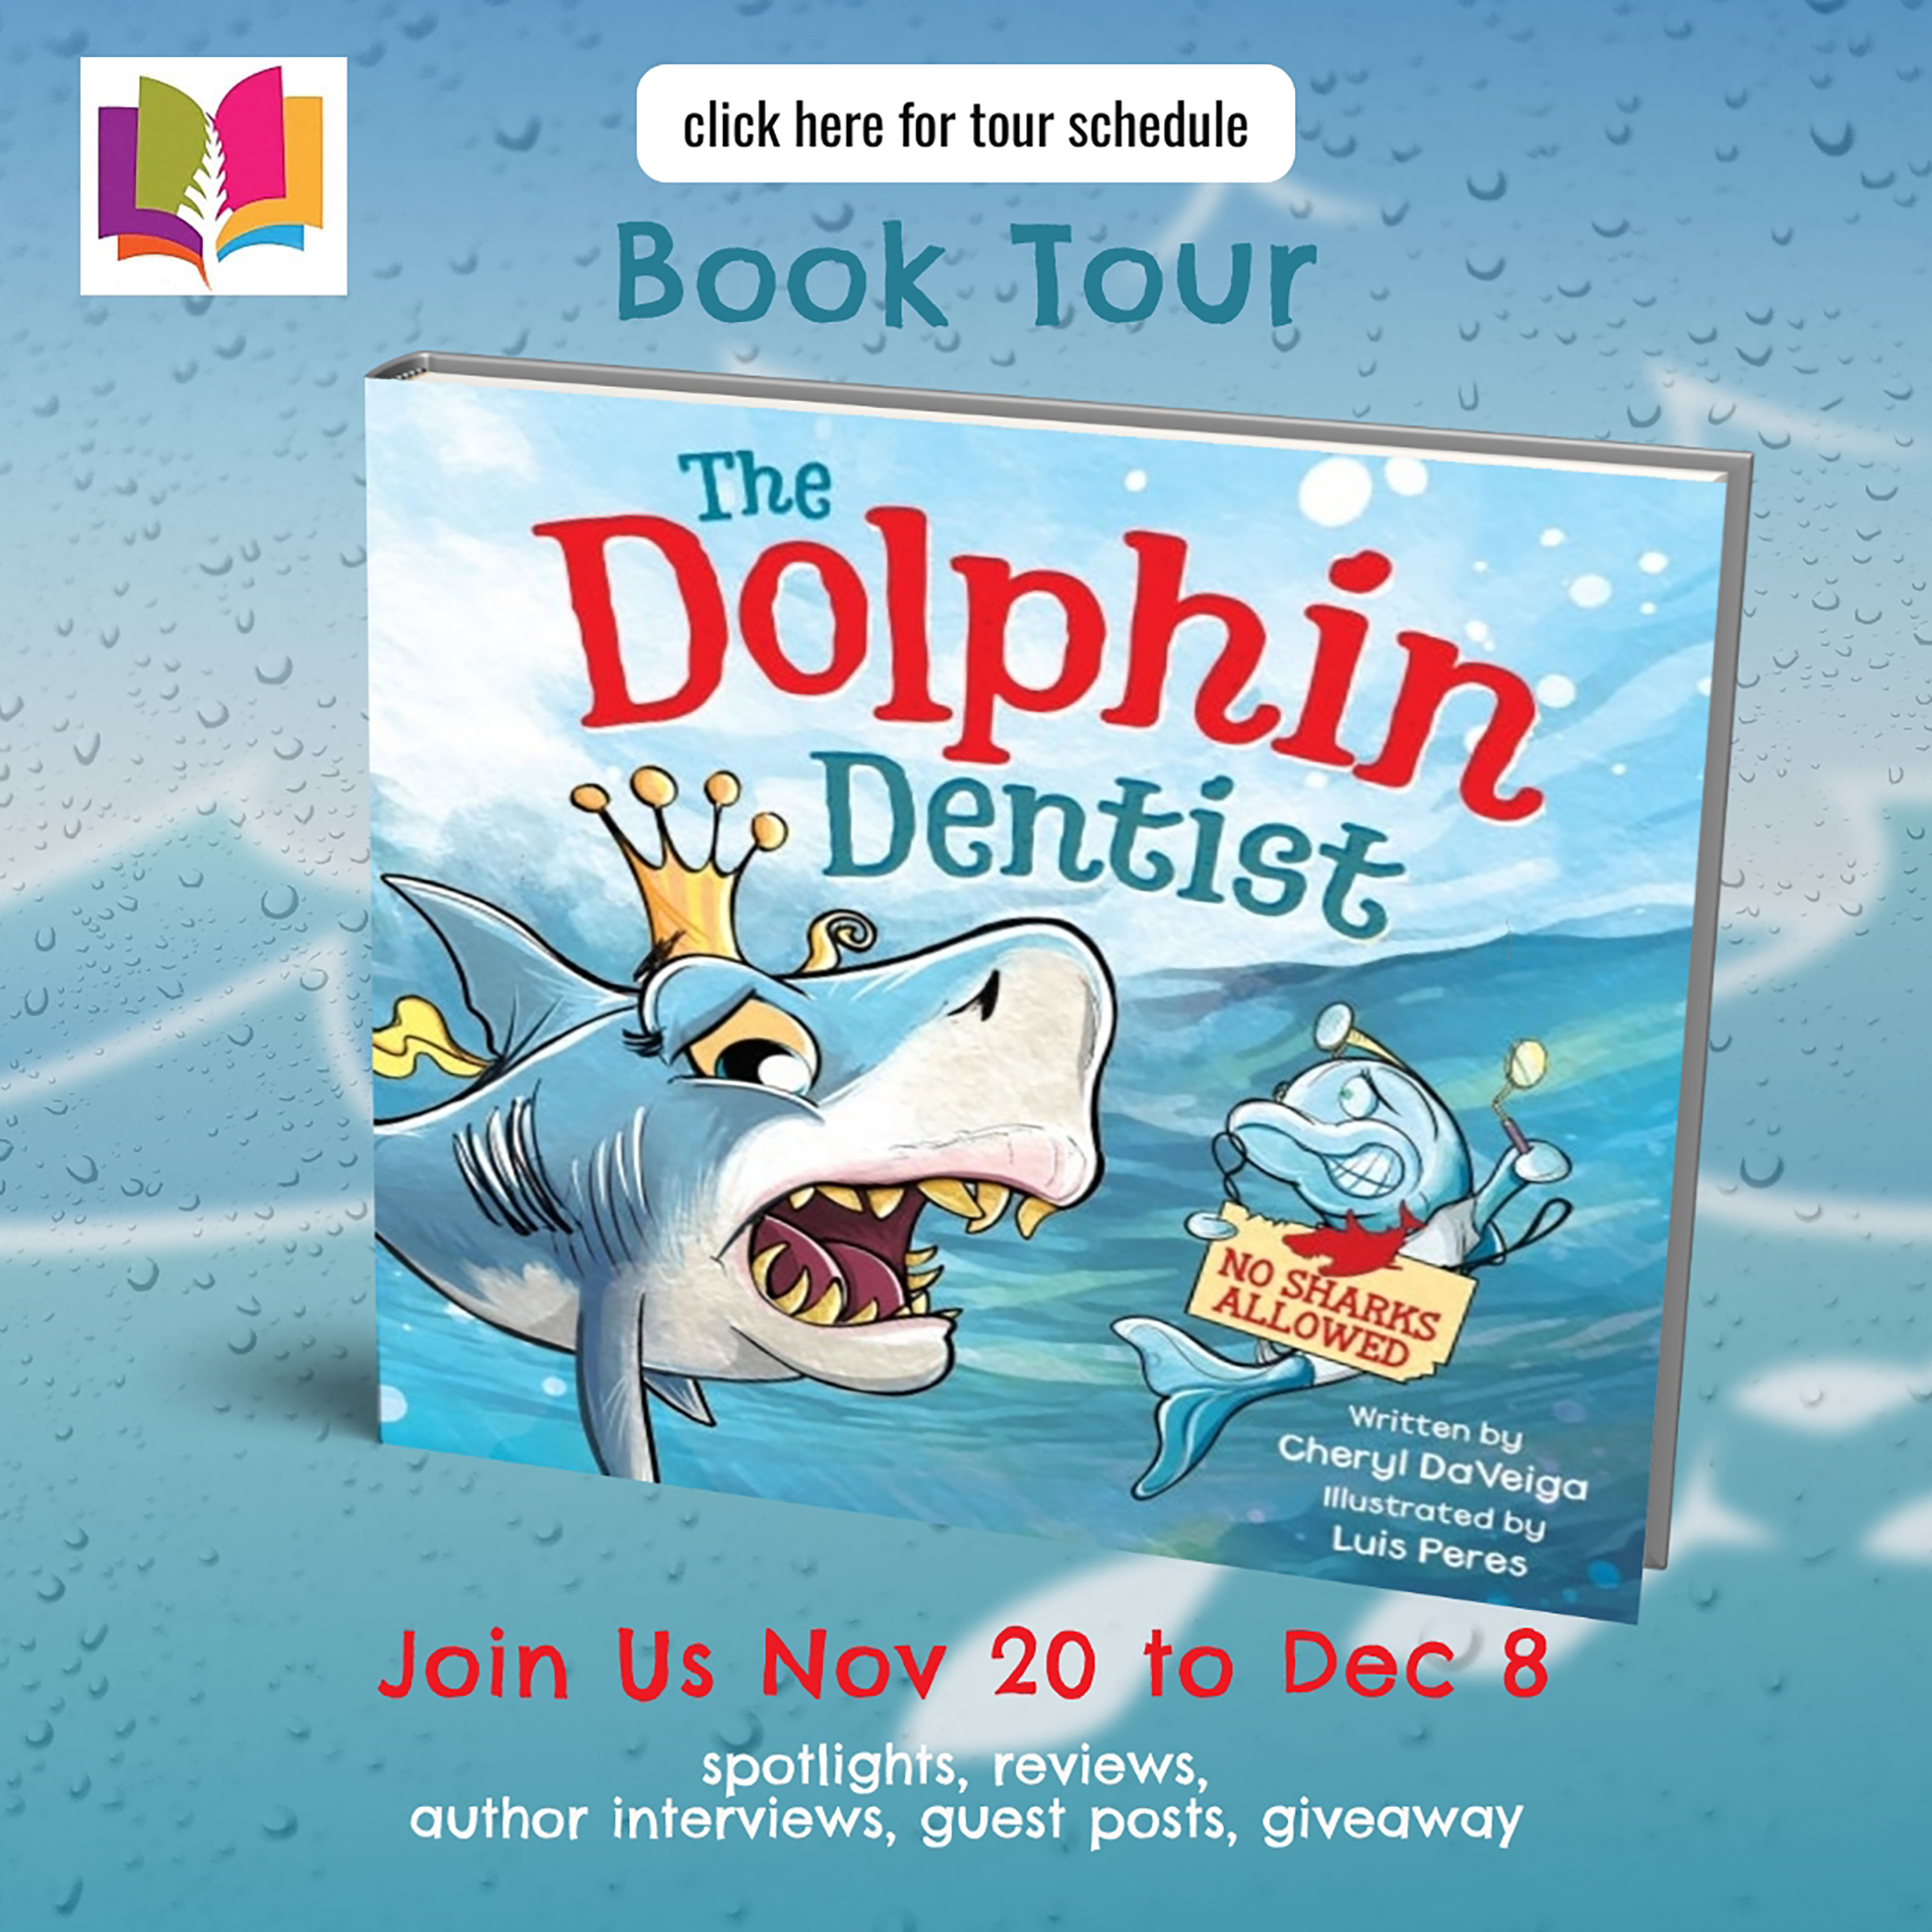 The Dolphin Dentist: No Sharks Allowed by Cheryl DaVeiga (A Children's Picture Book About Conquering Fear for Kids age 4-8) | Children's Book Review ~ Author Guest Post on Kindness | @BiffBamBooza Books @iReadBookTours #FacingFears #Giftable